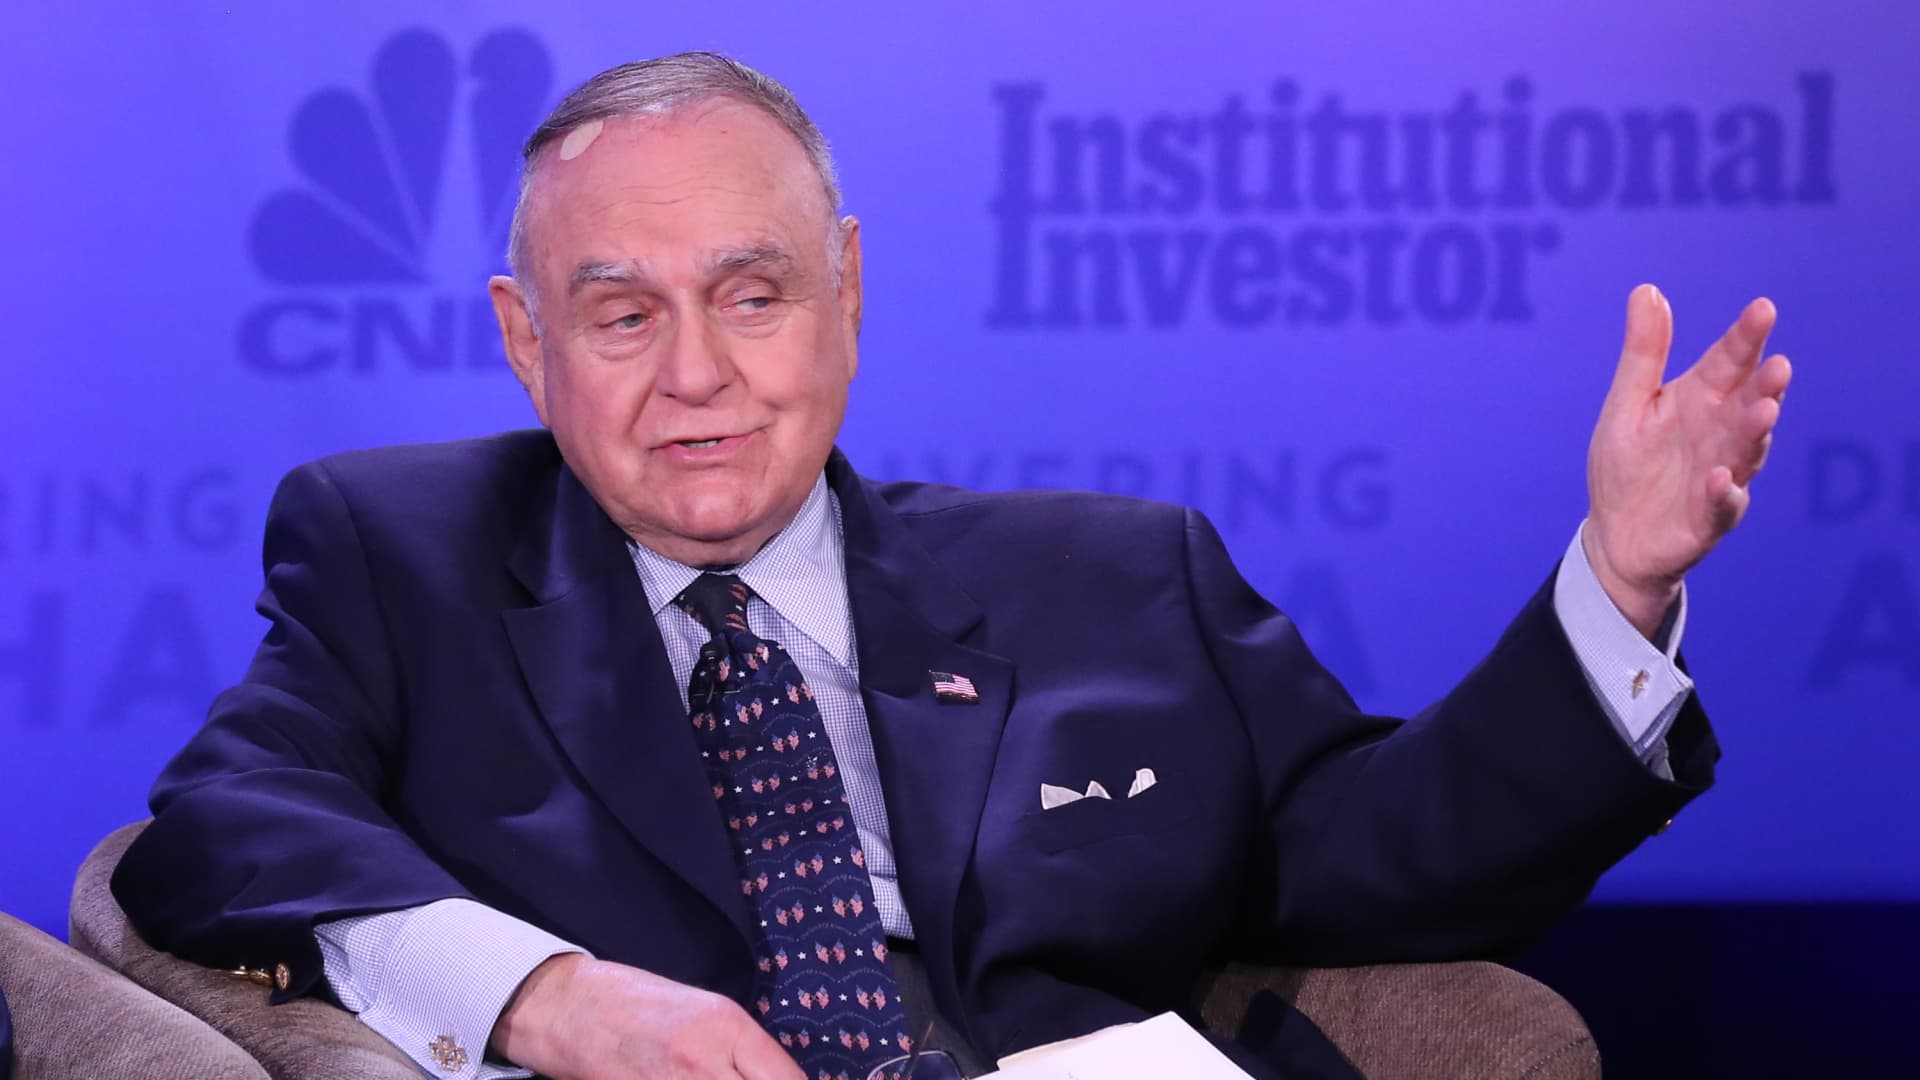 Leon Cooperman calls for a recession next year, expects S&P to drop 40% from January’s all-time high